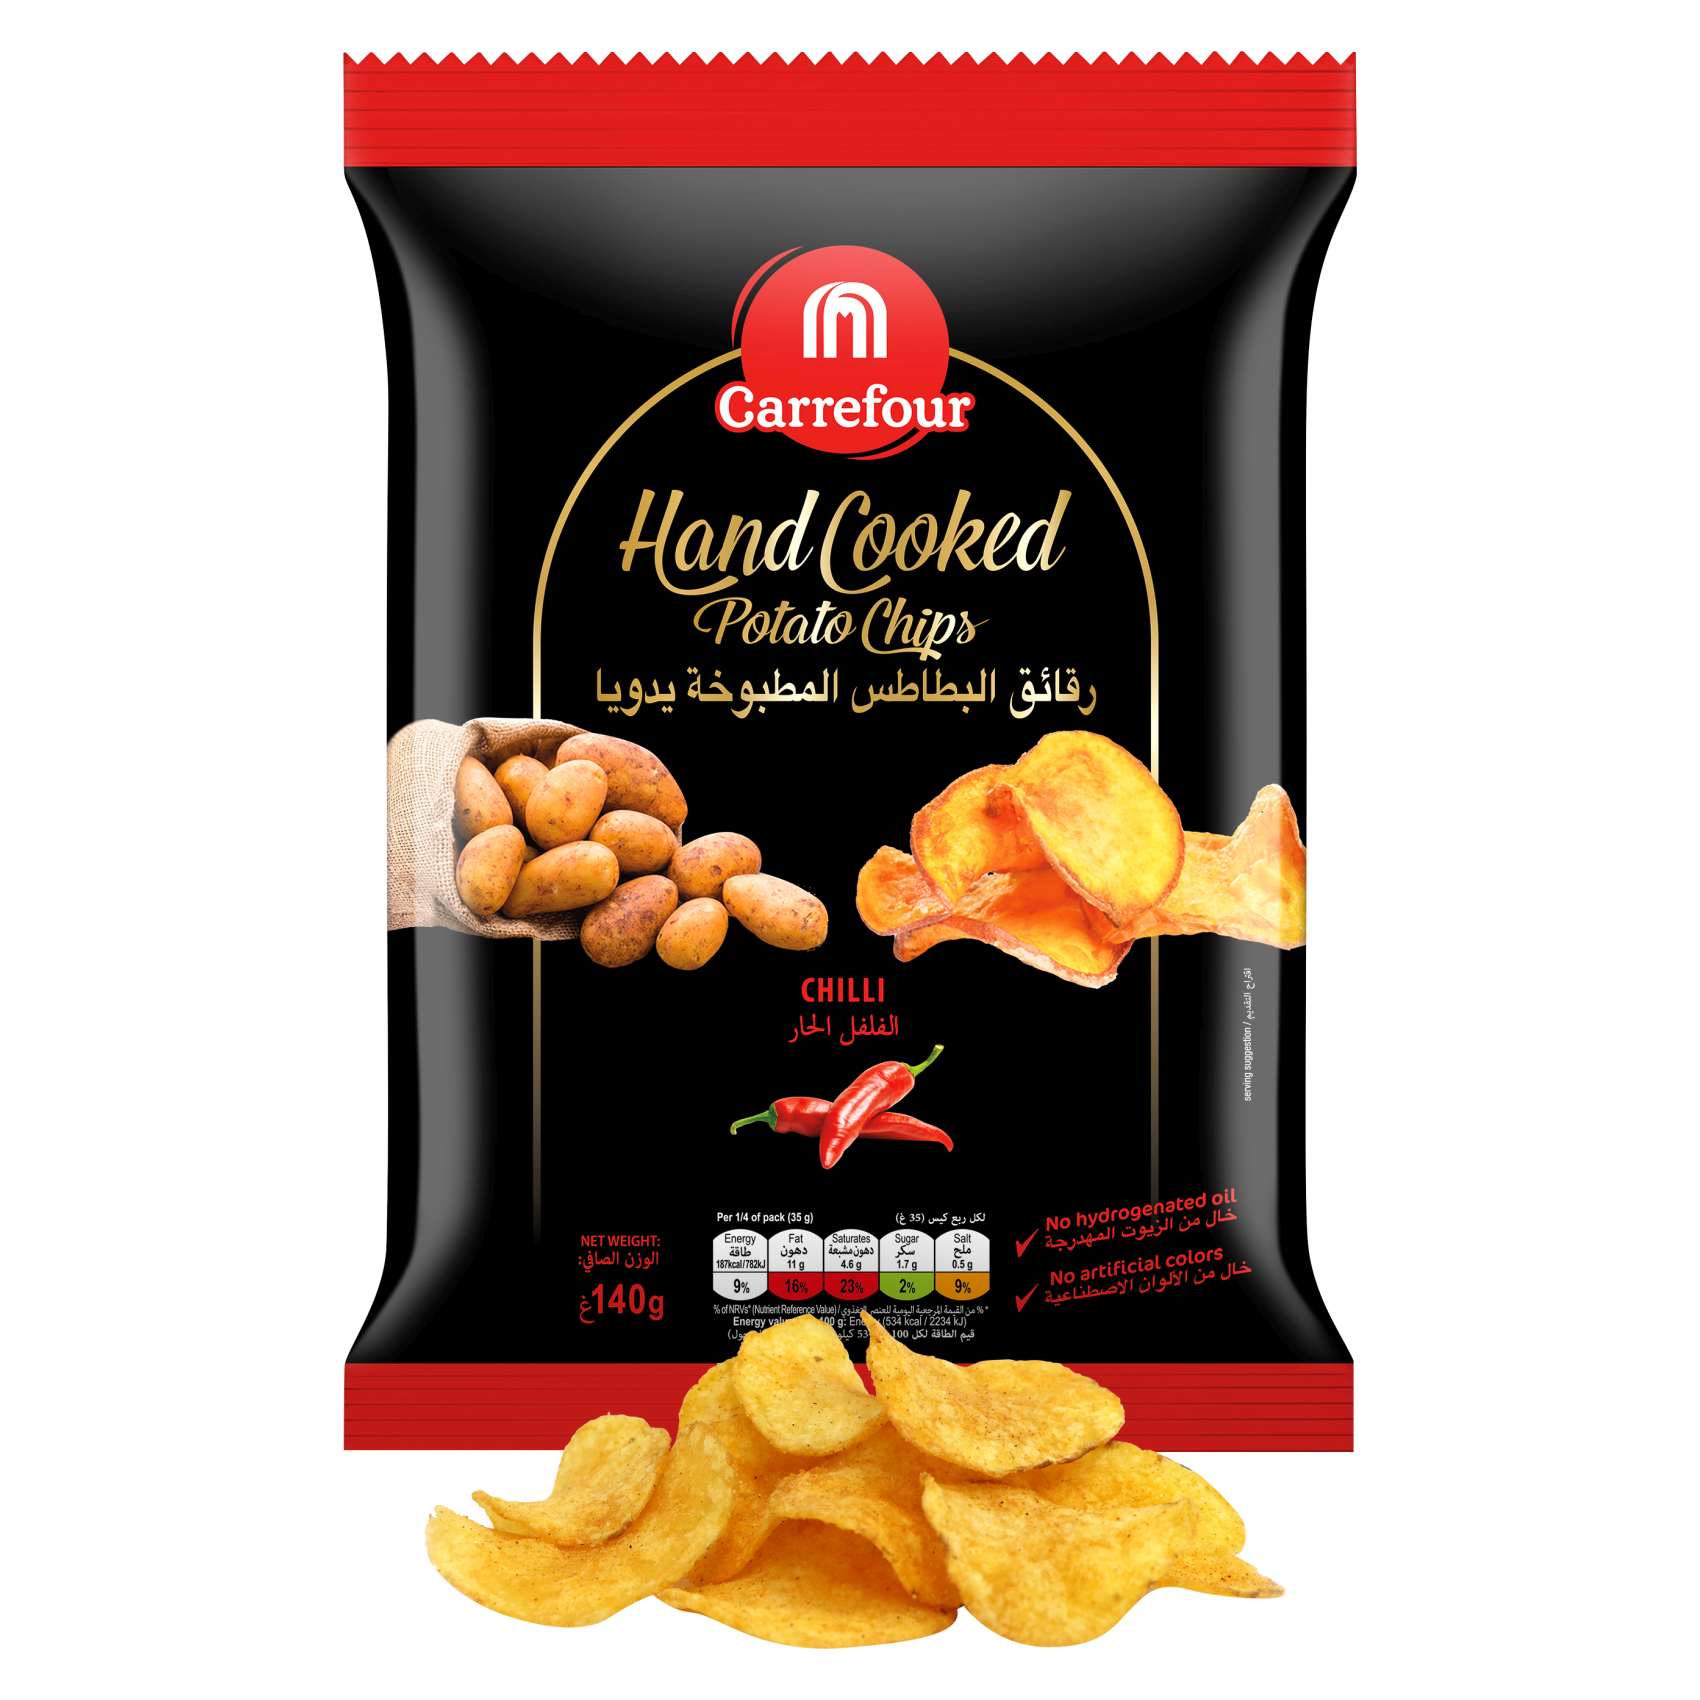 Carrefour Handcooked Potato Chips With Chili 140g